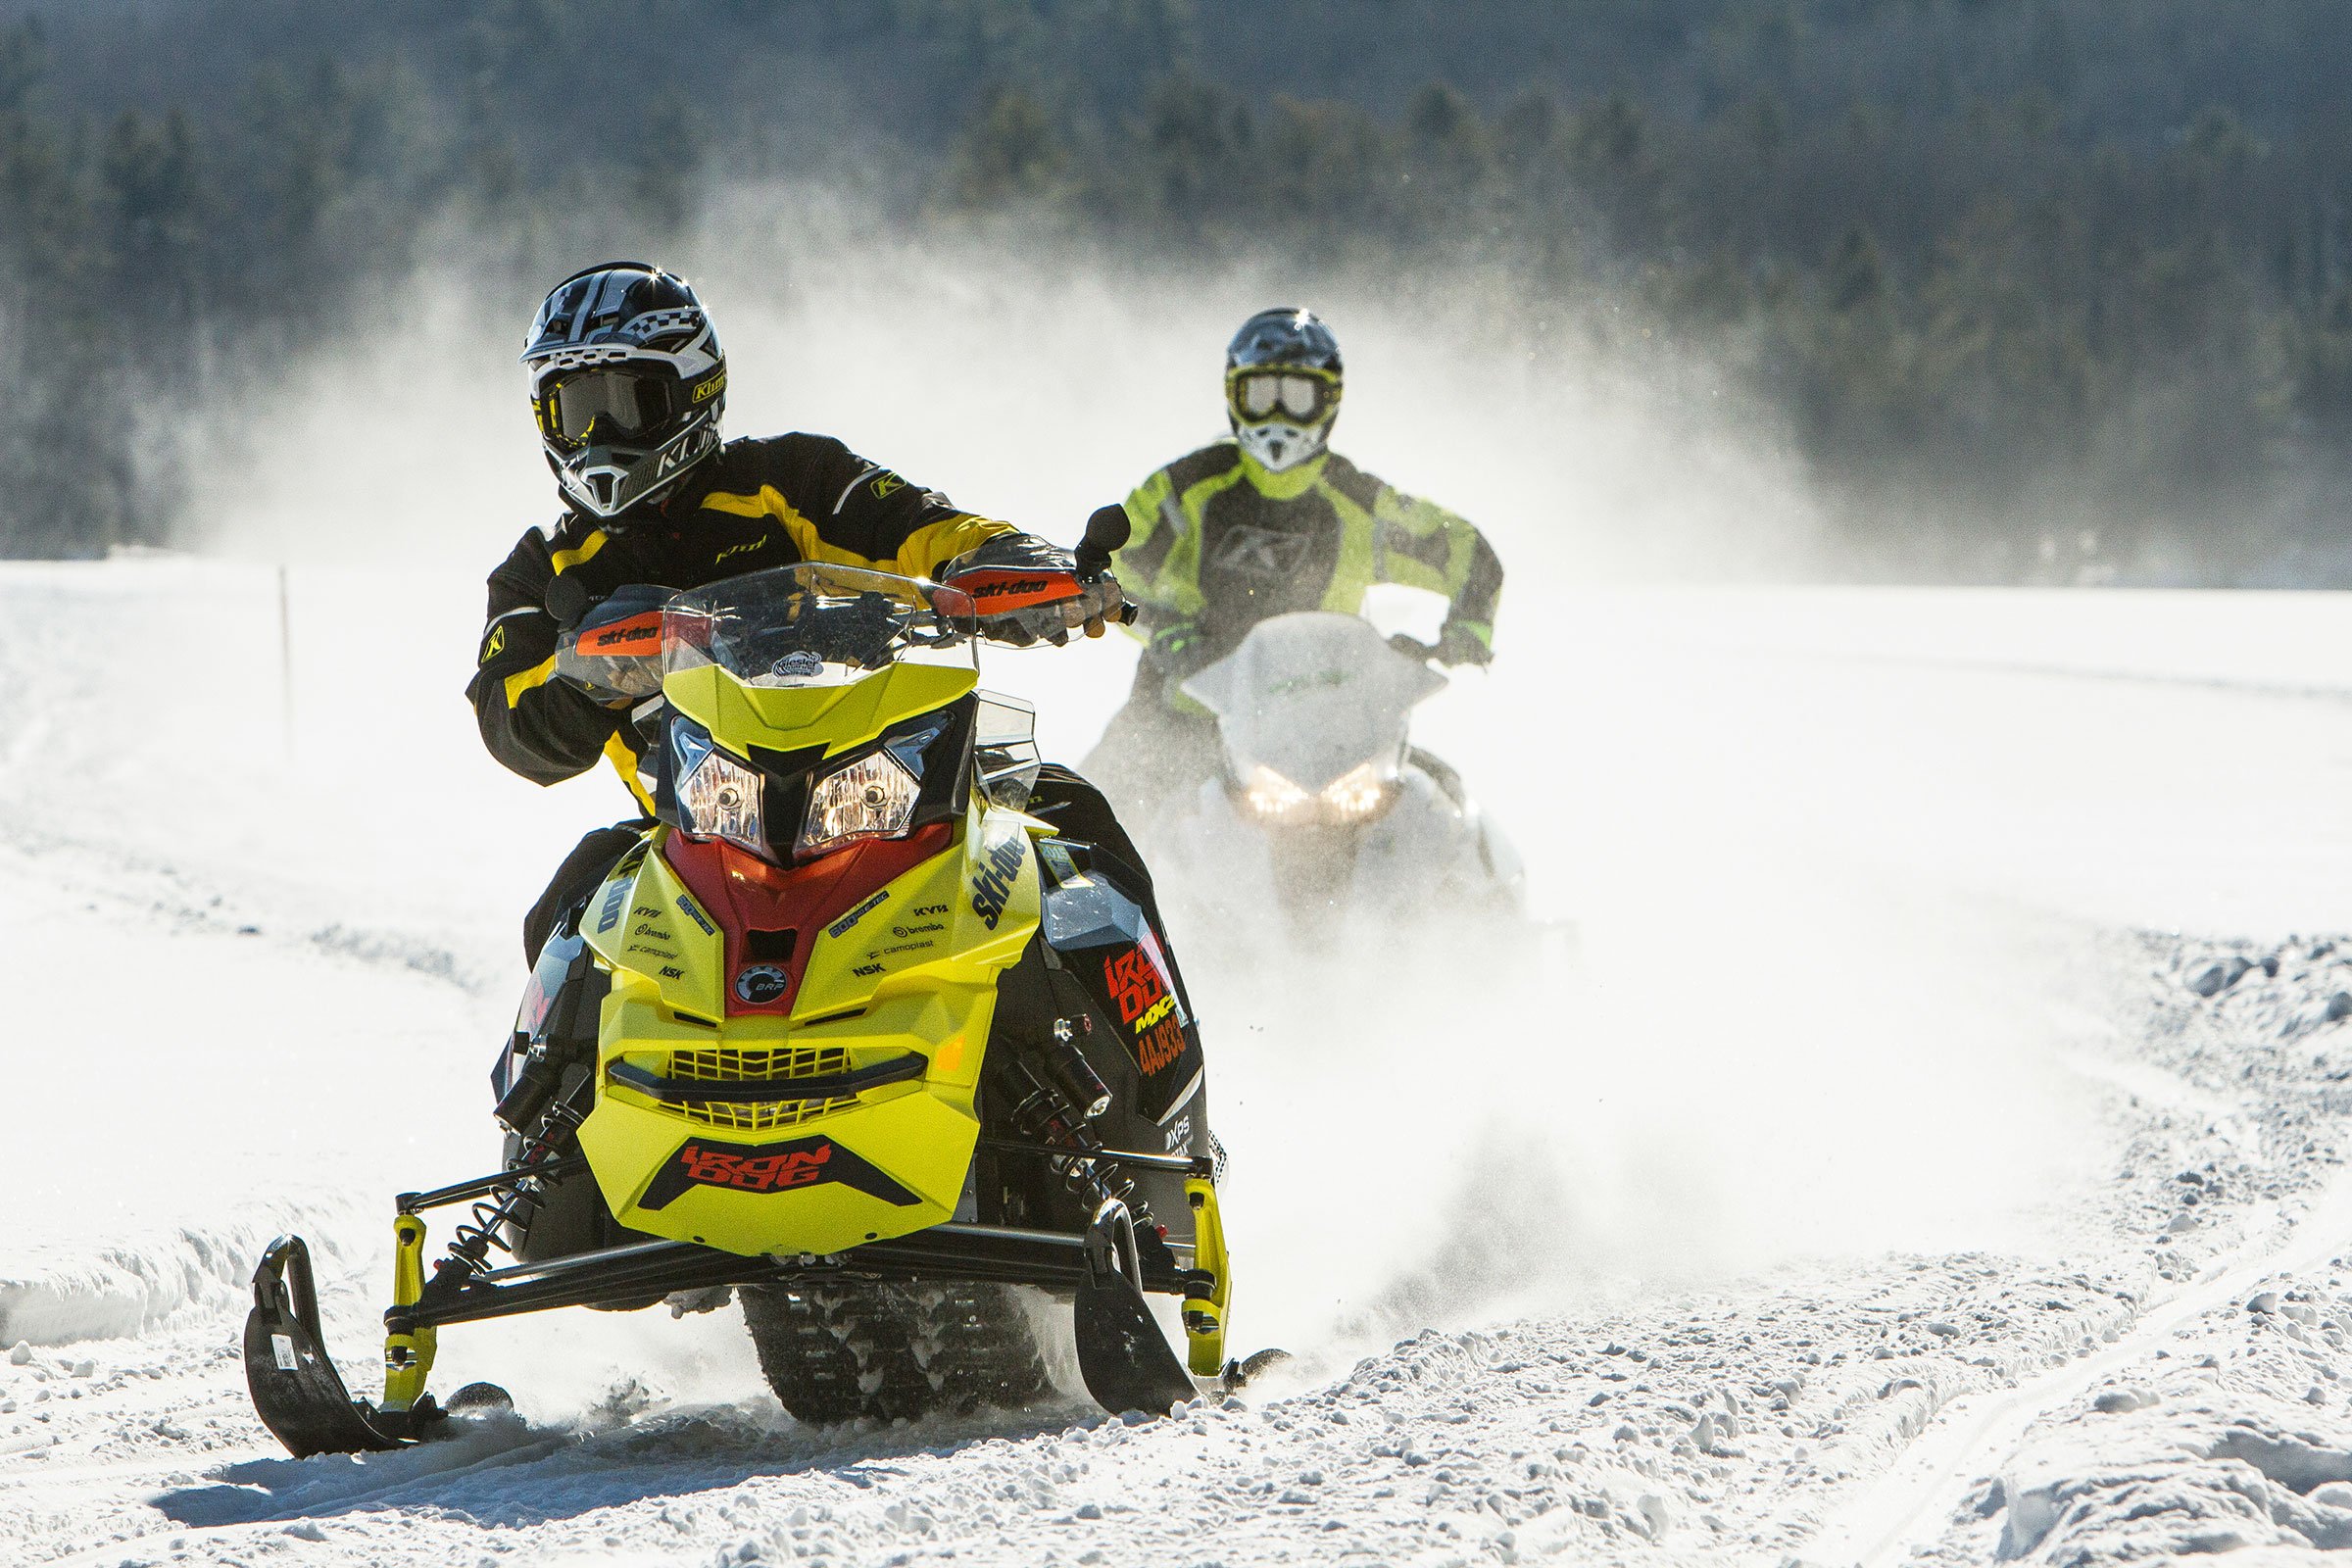 Snowmobiling in Ontario